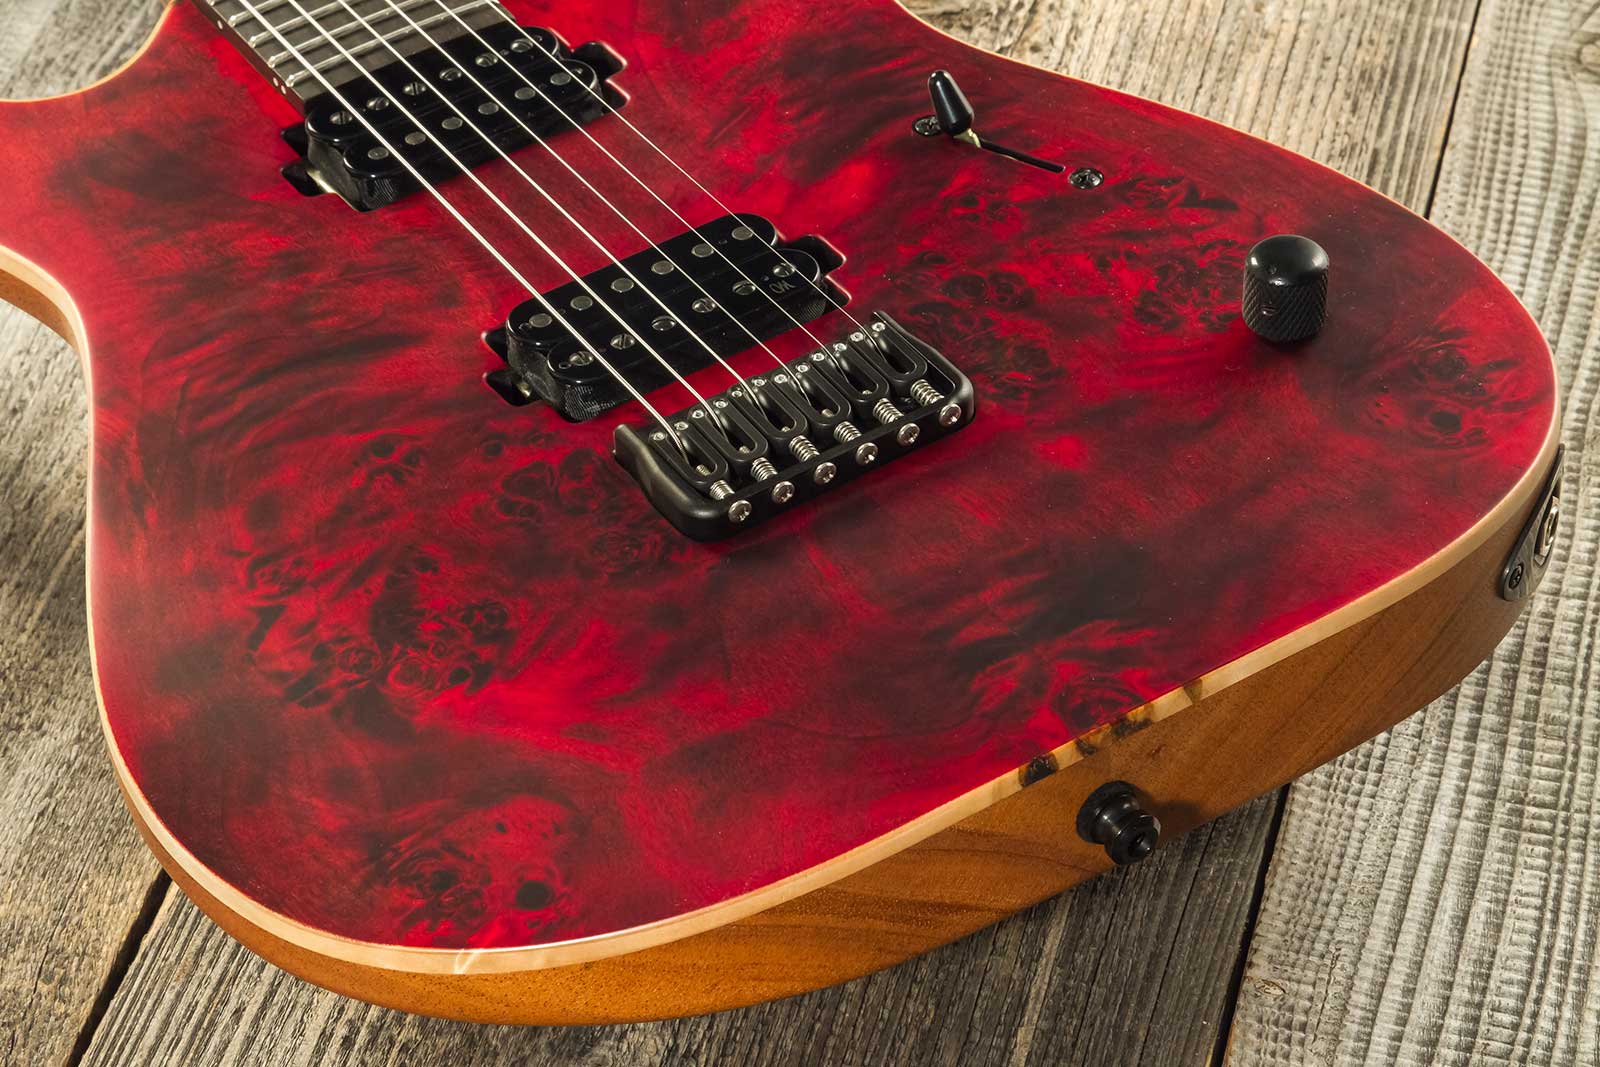 Mayones Guitars Duvell Elite 6 2h Bare Knuckle Ht Eb #df2301294 - Trans Dirty Red Satine - Metal electric guitar - Variation 3